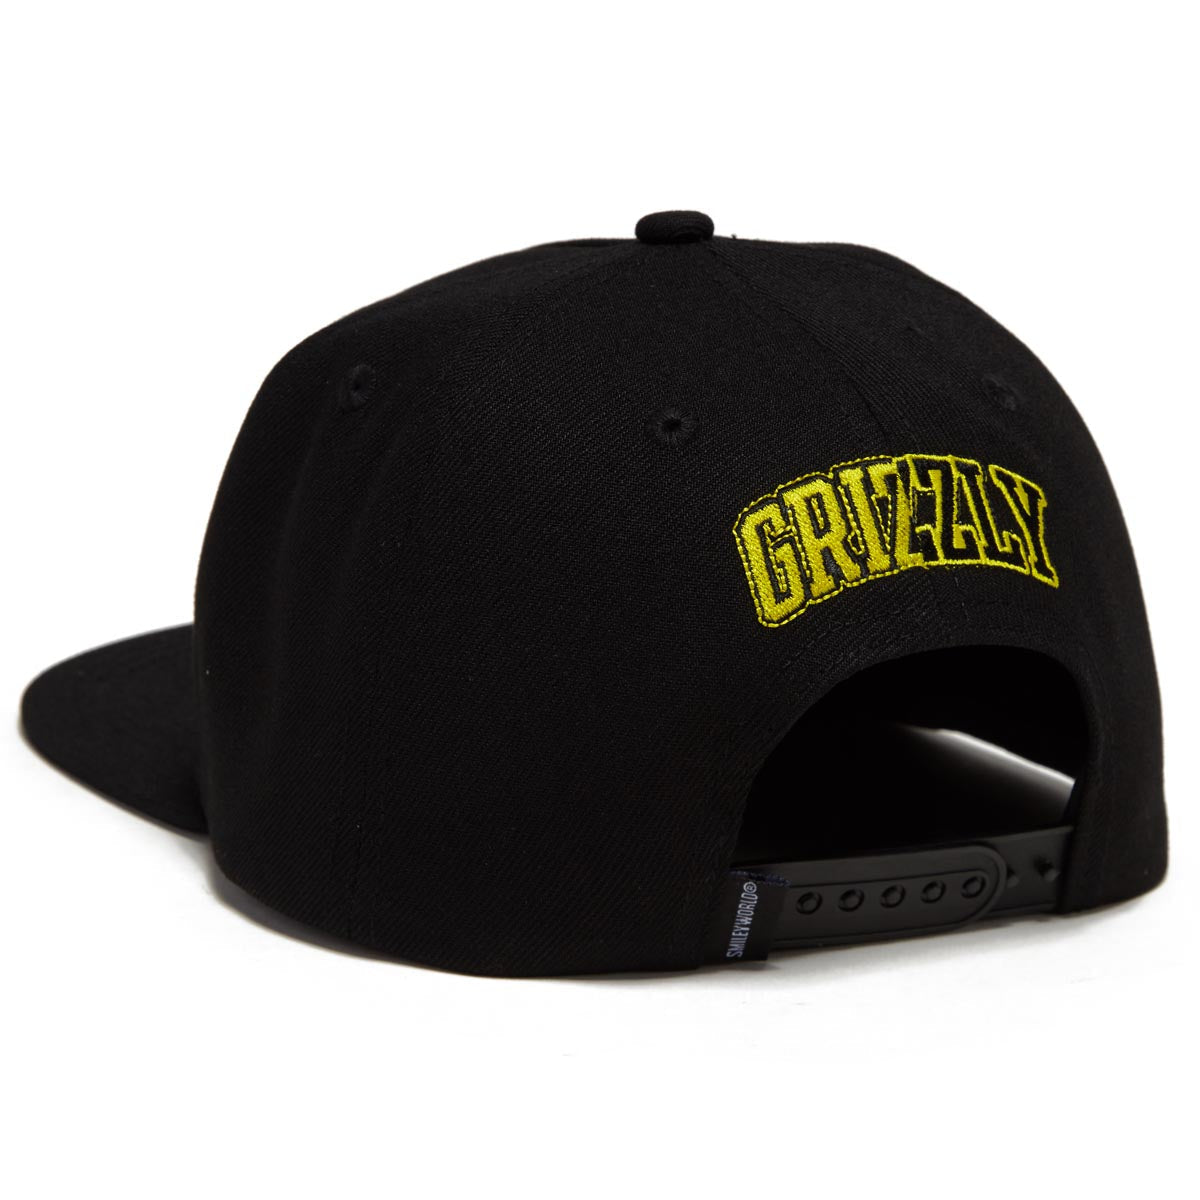 Grizzly x Smiley World Snapback Hat - Black image 2